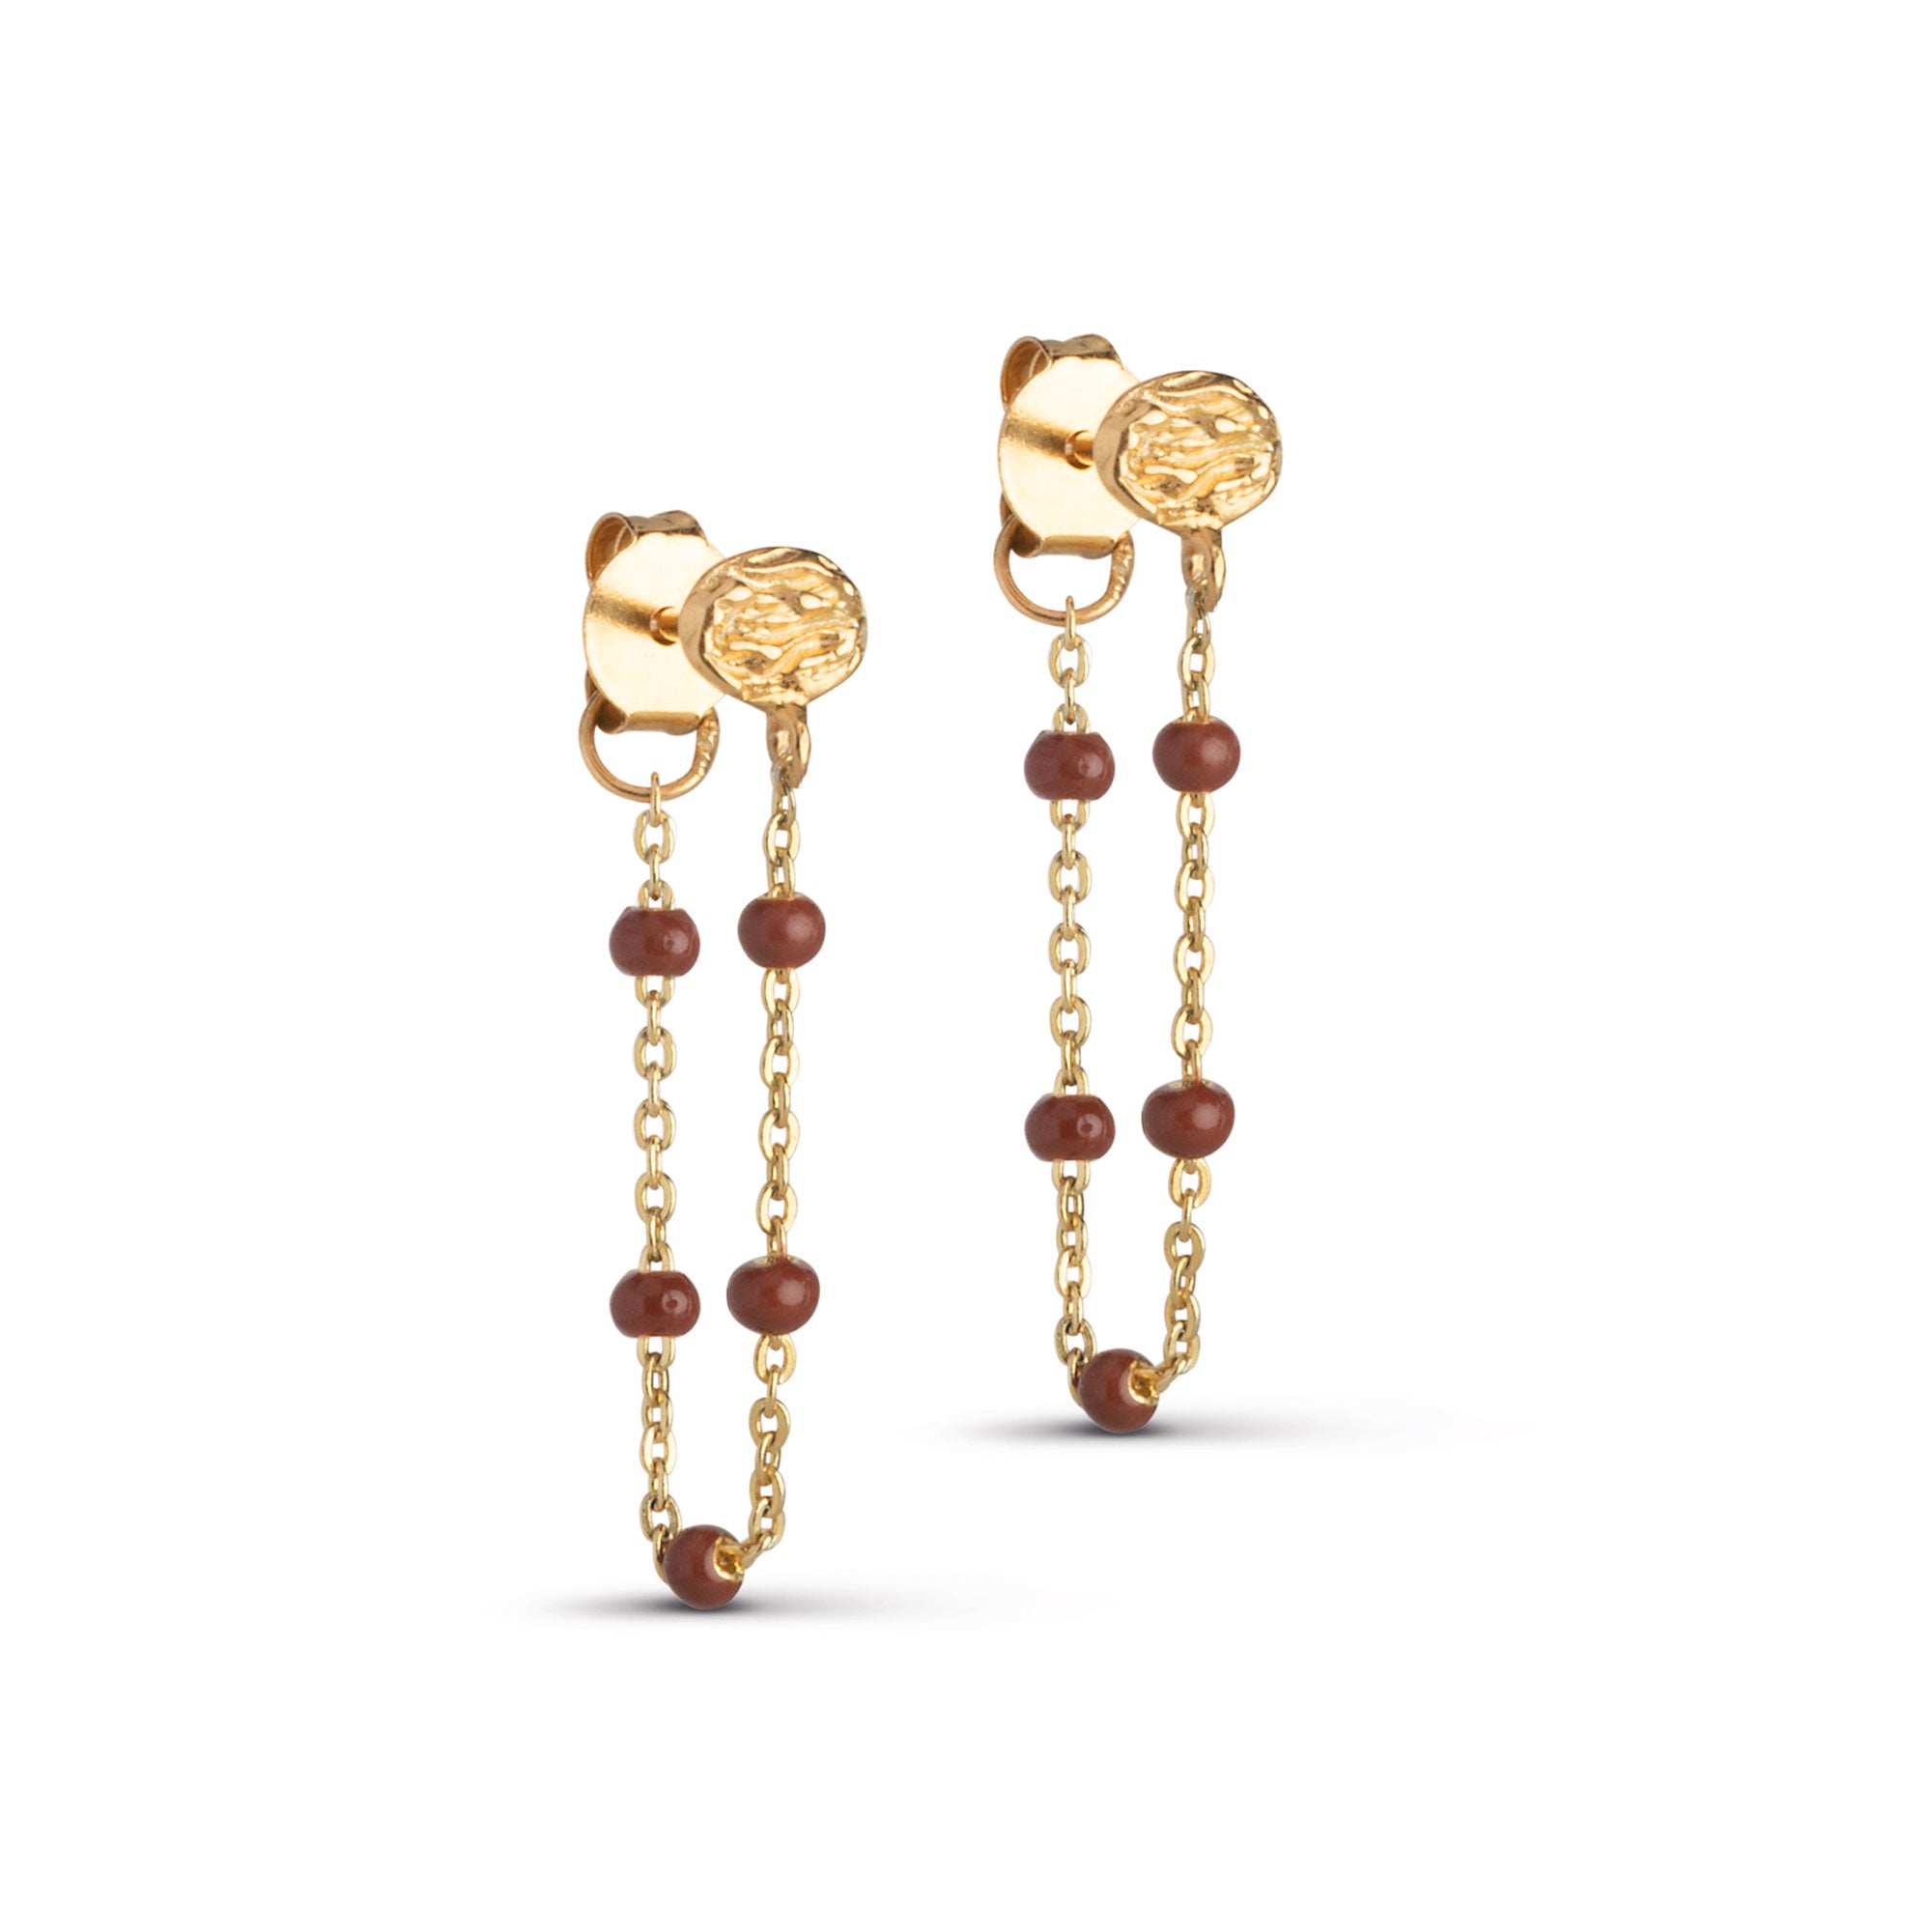 Buy Real Gold Design Hanging Chain Gold Plated Earrings Online